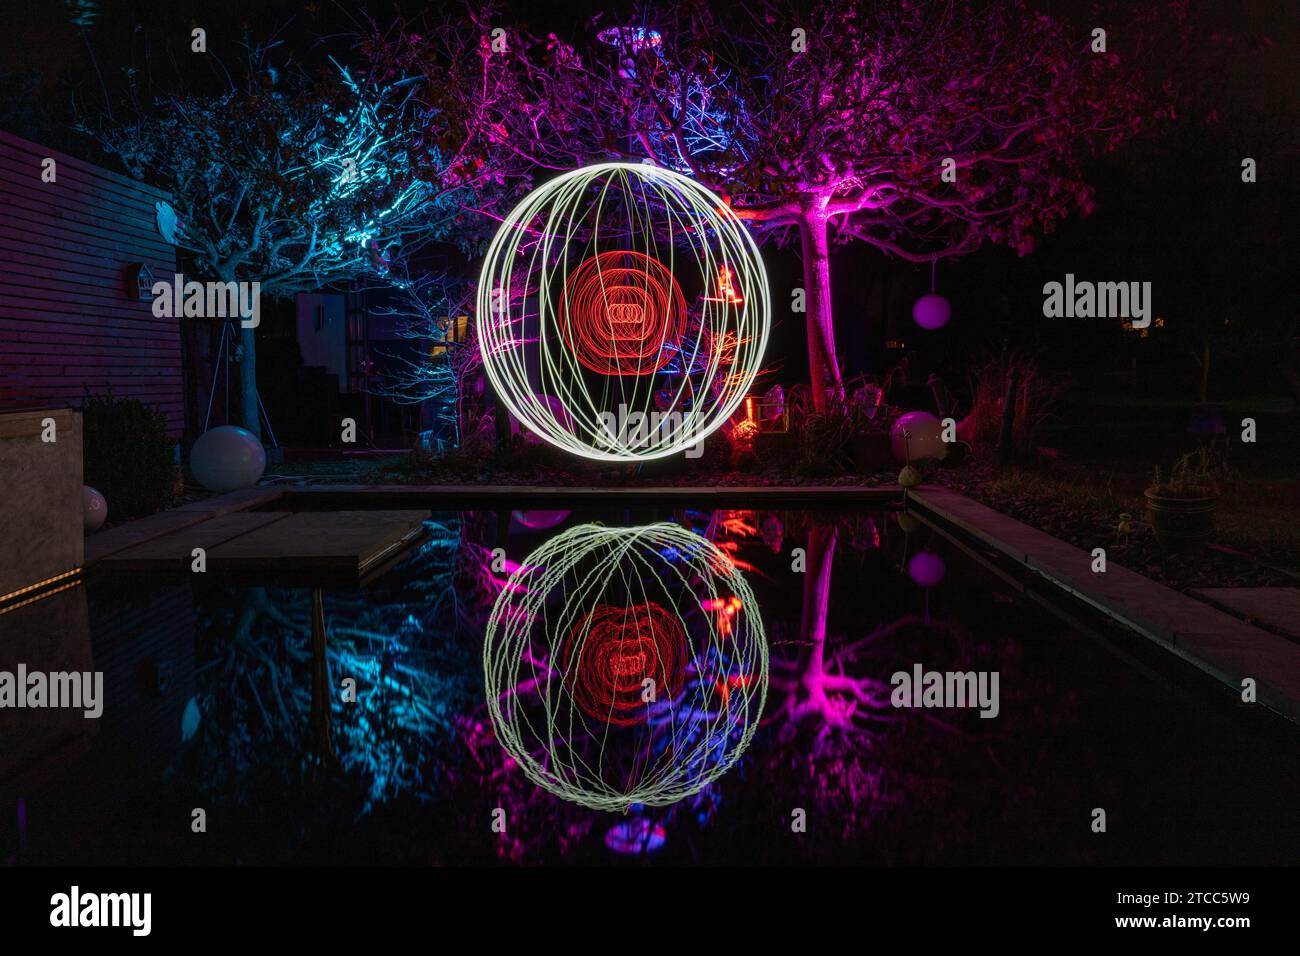 Light painting with colorfully illuminated trees and reflections in water Stock Photo